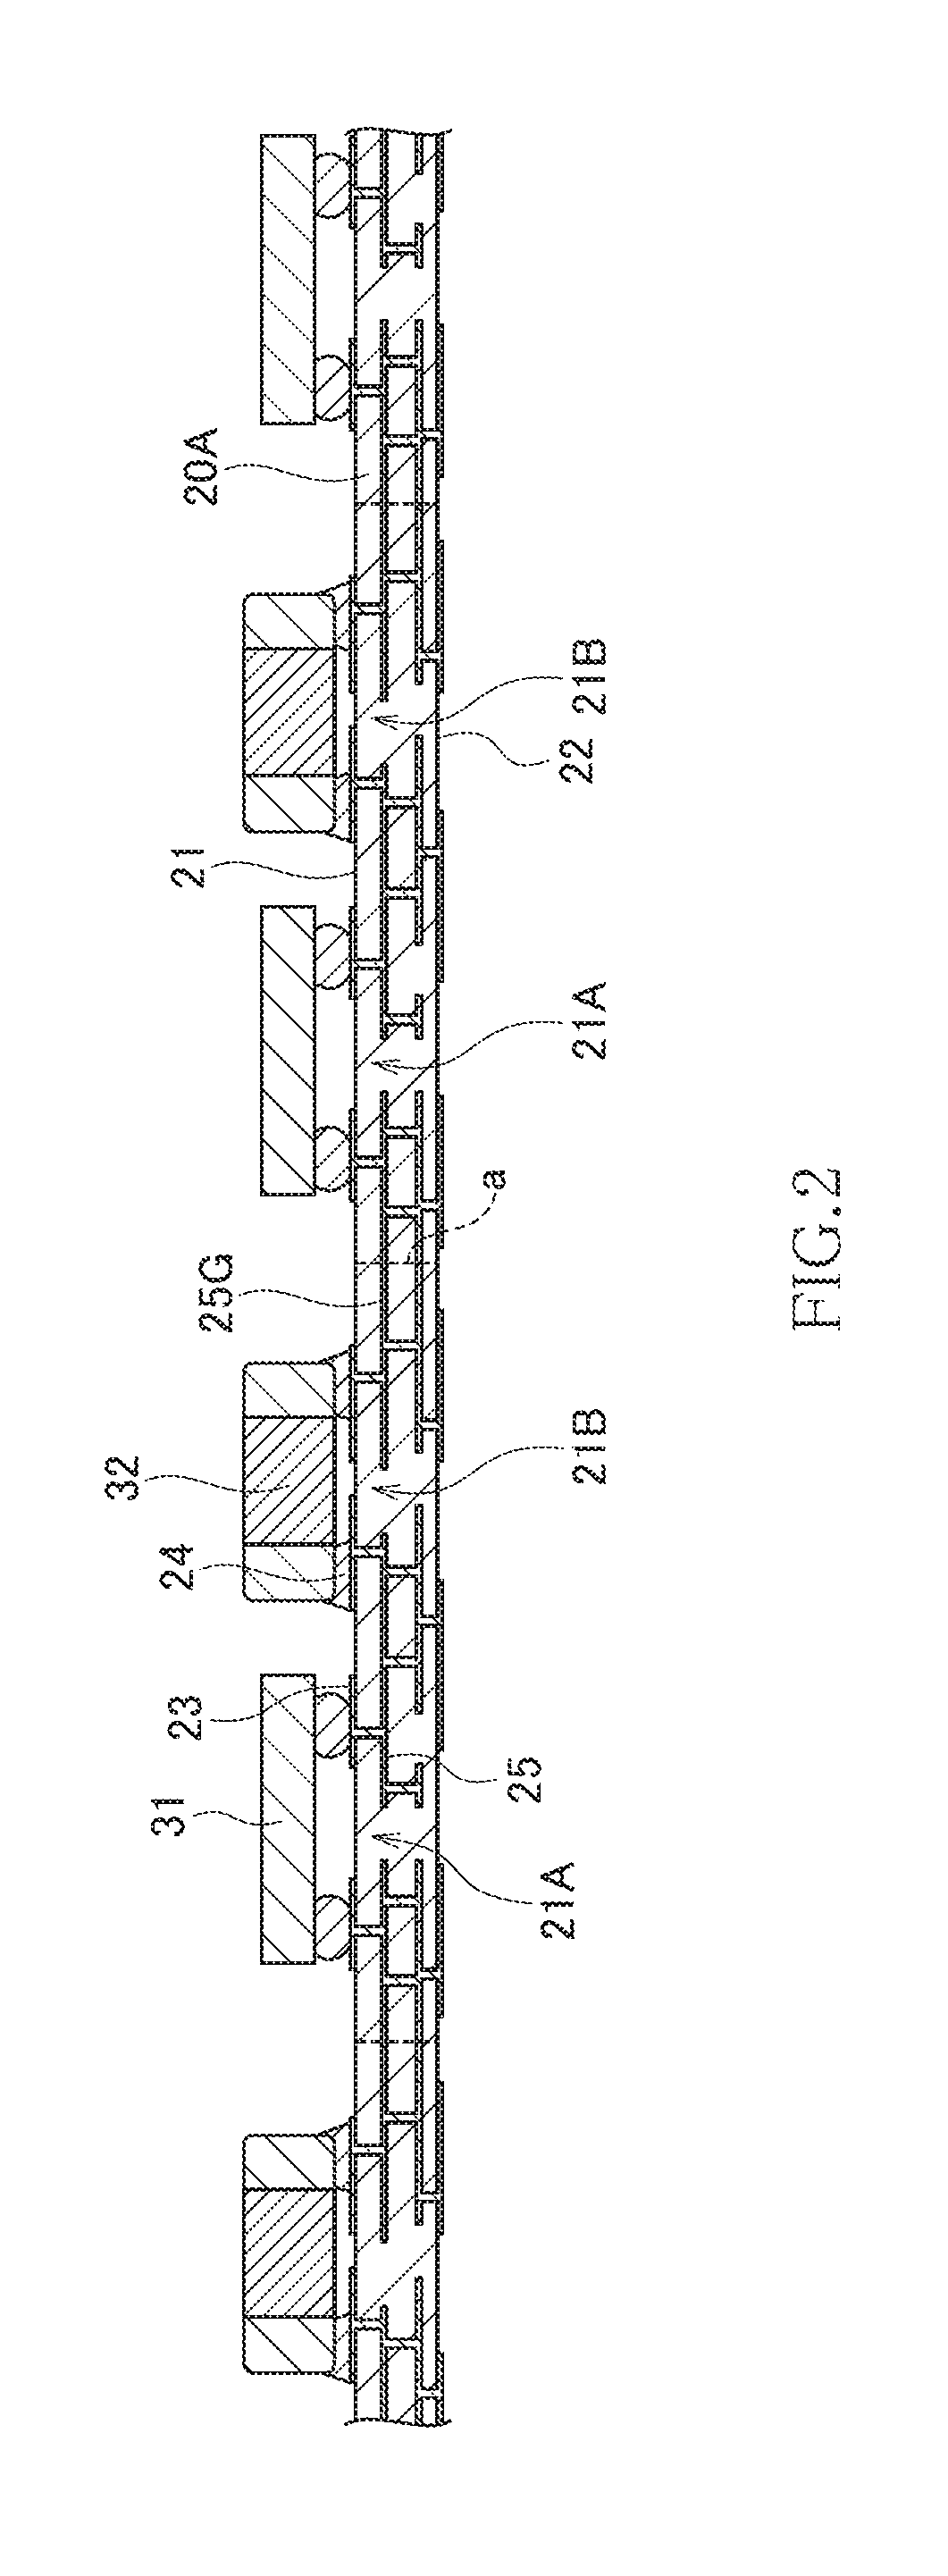 Electronic circuit package